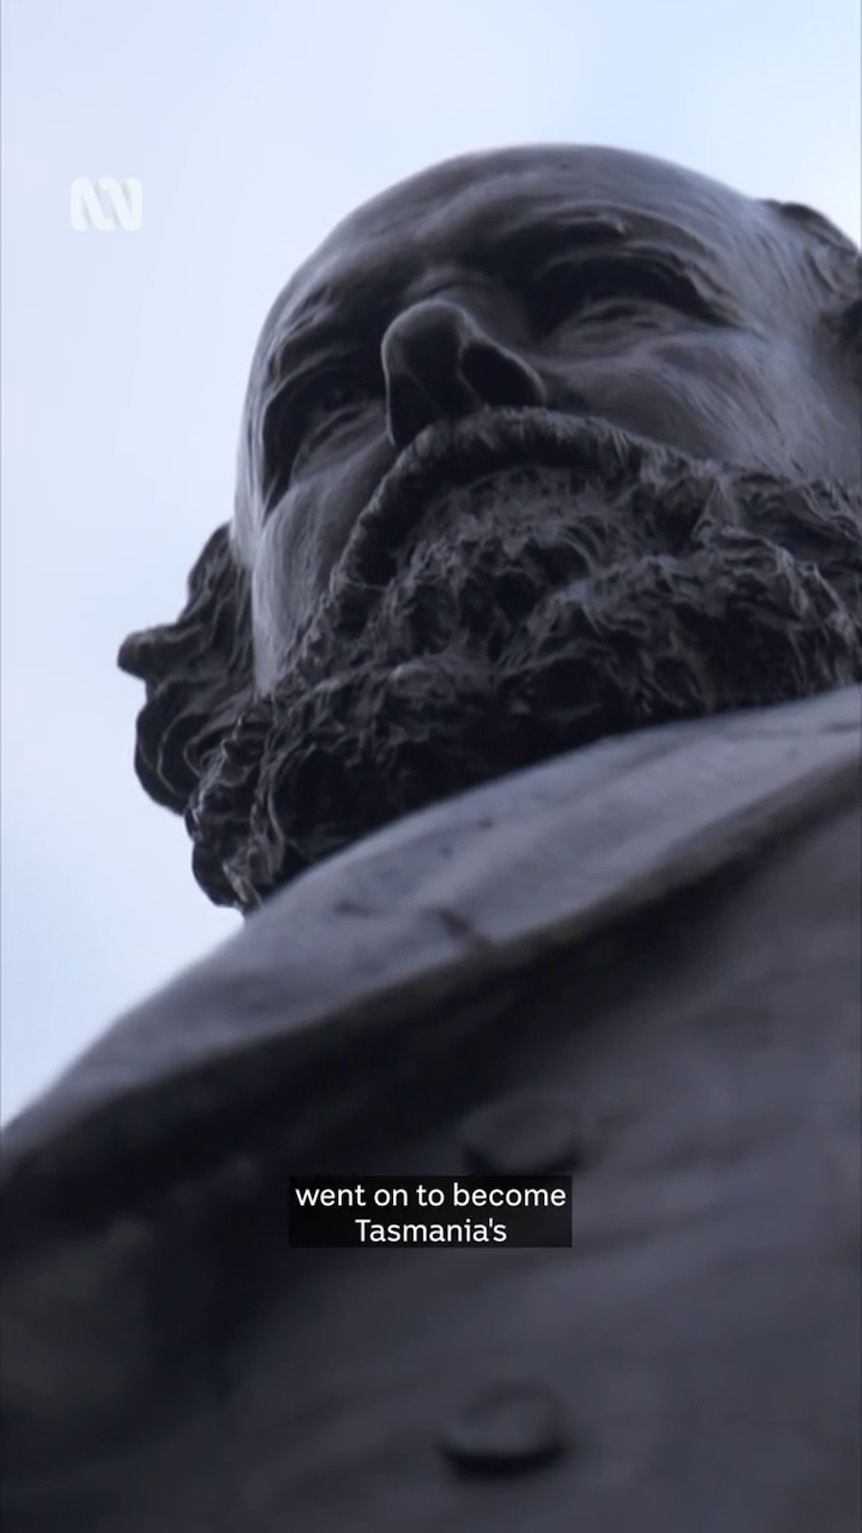 Looking up at a dark statue of a man with a large beard